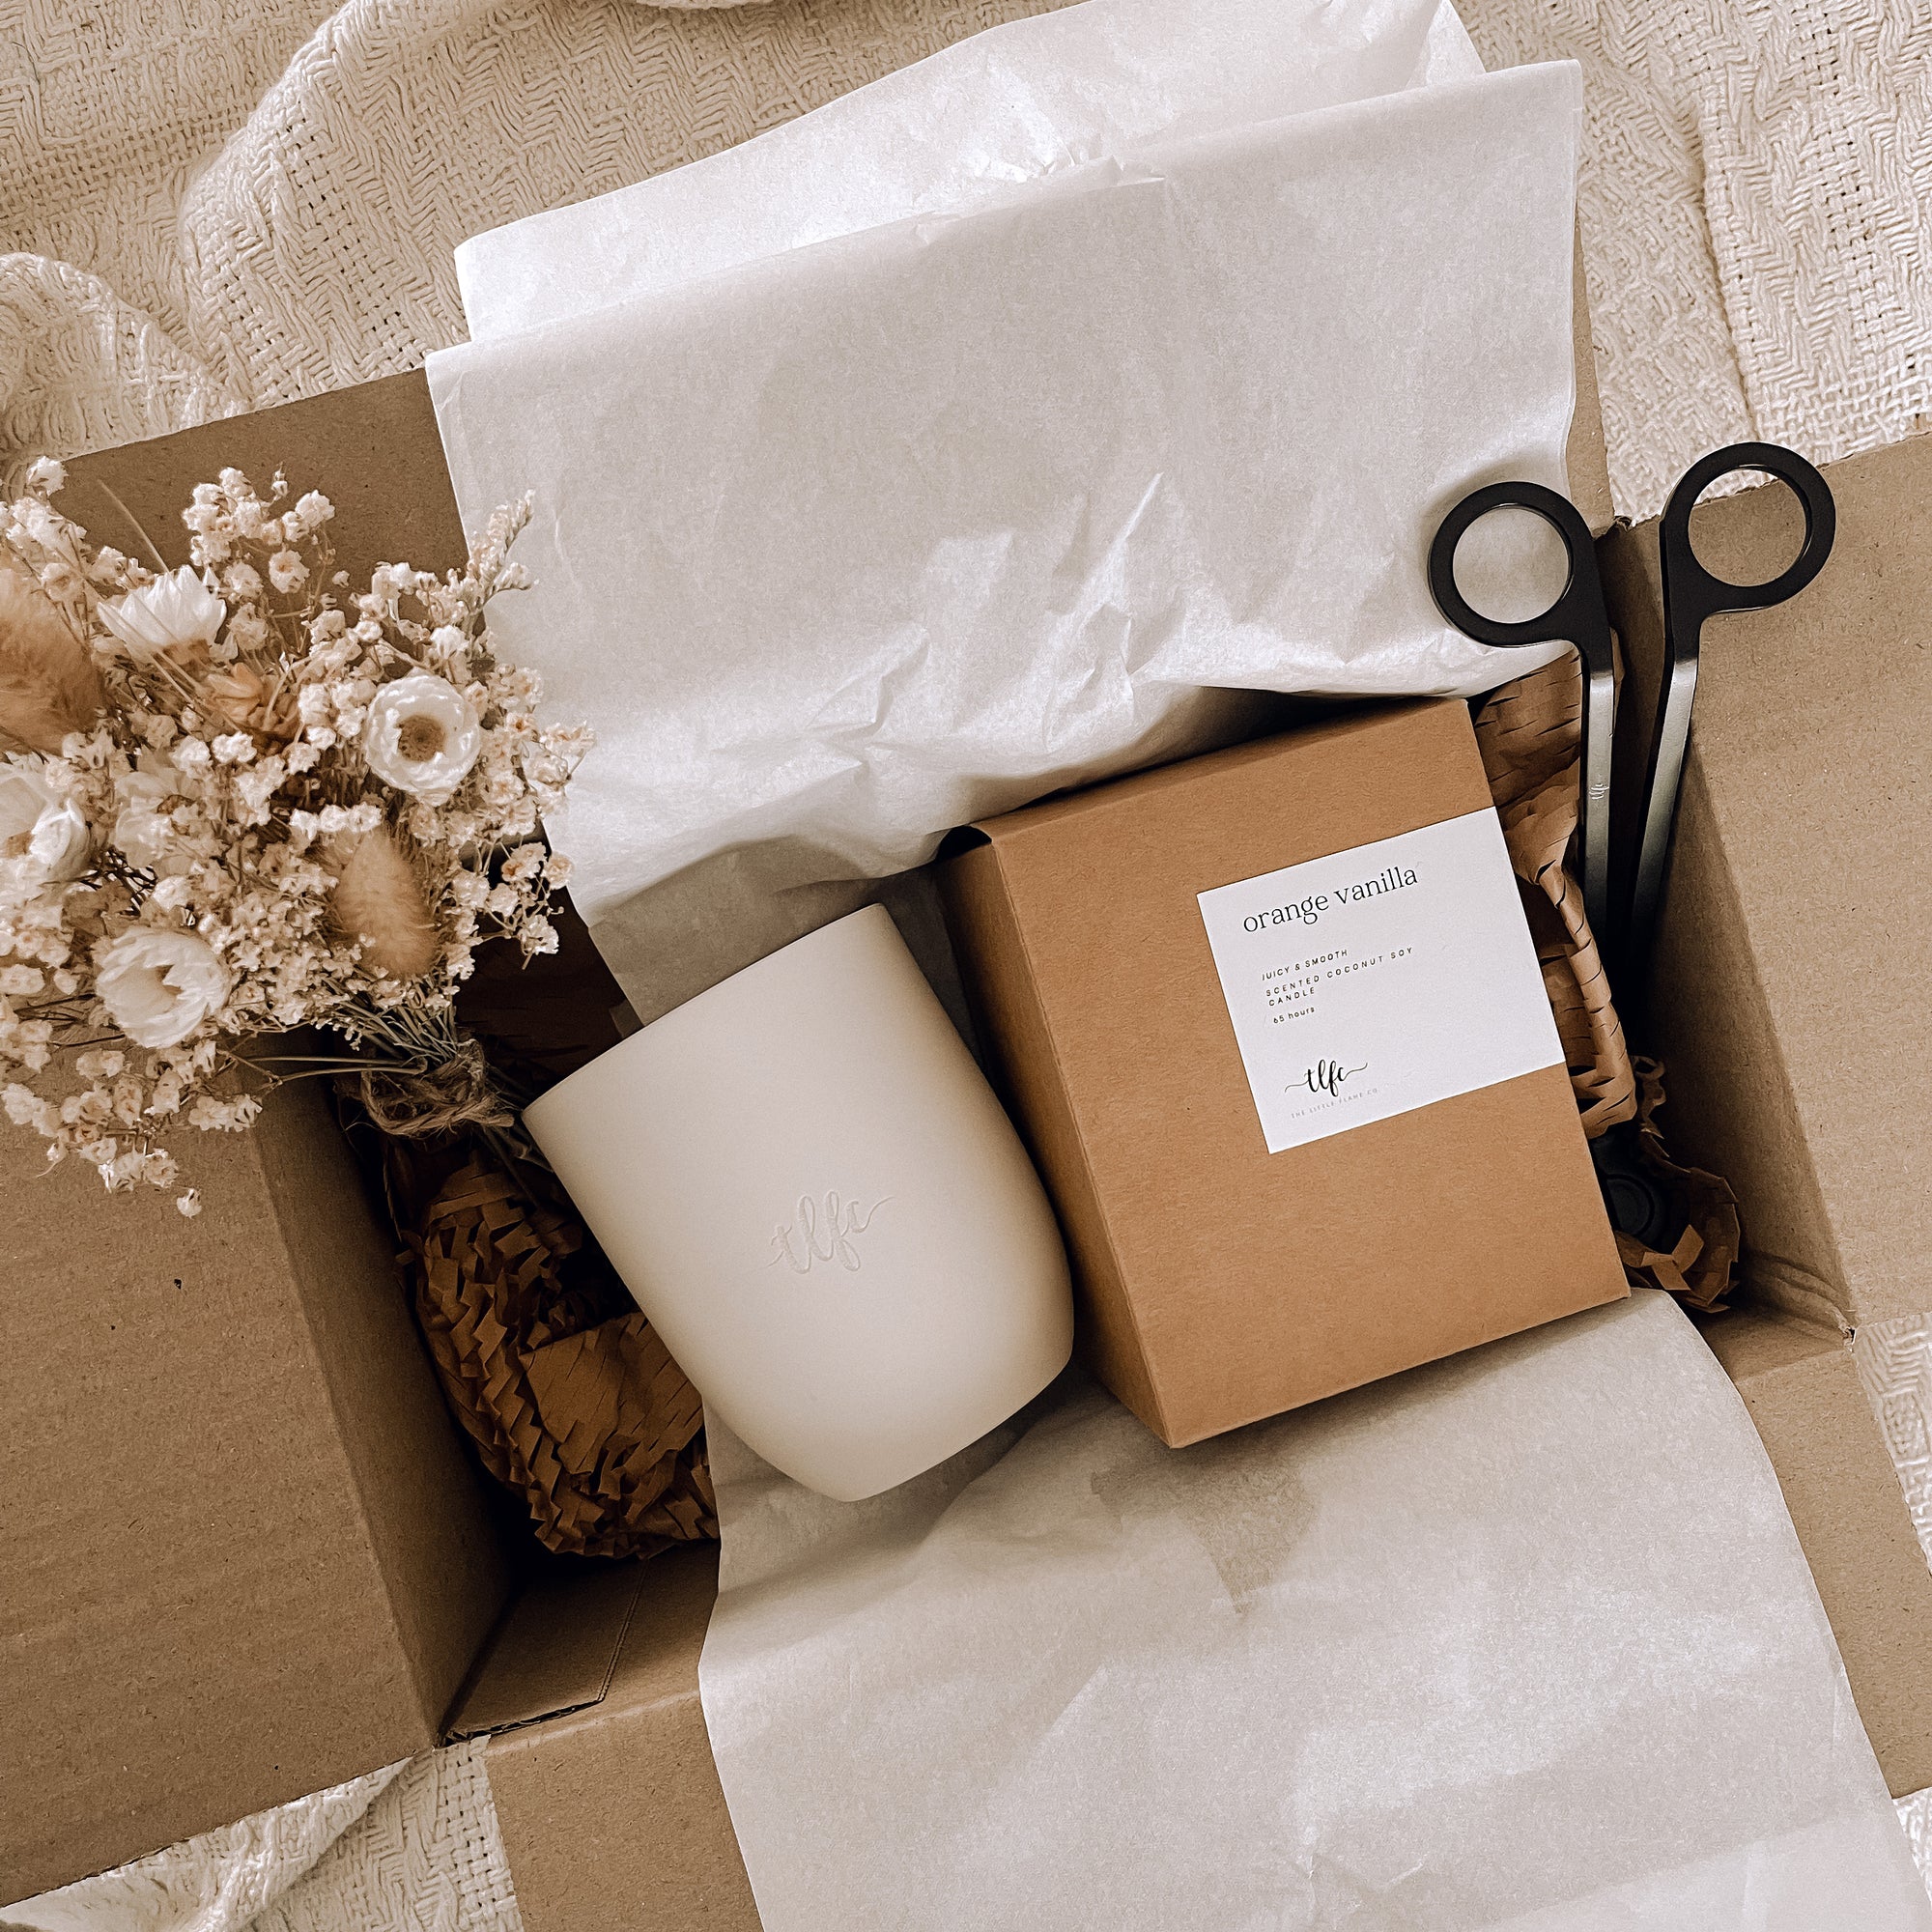 Candle Subscription Box - 6 Month